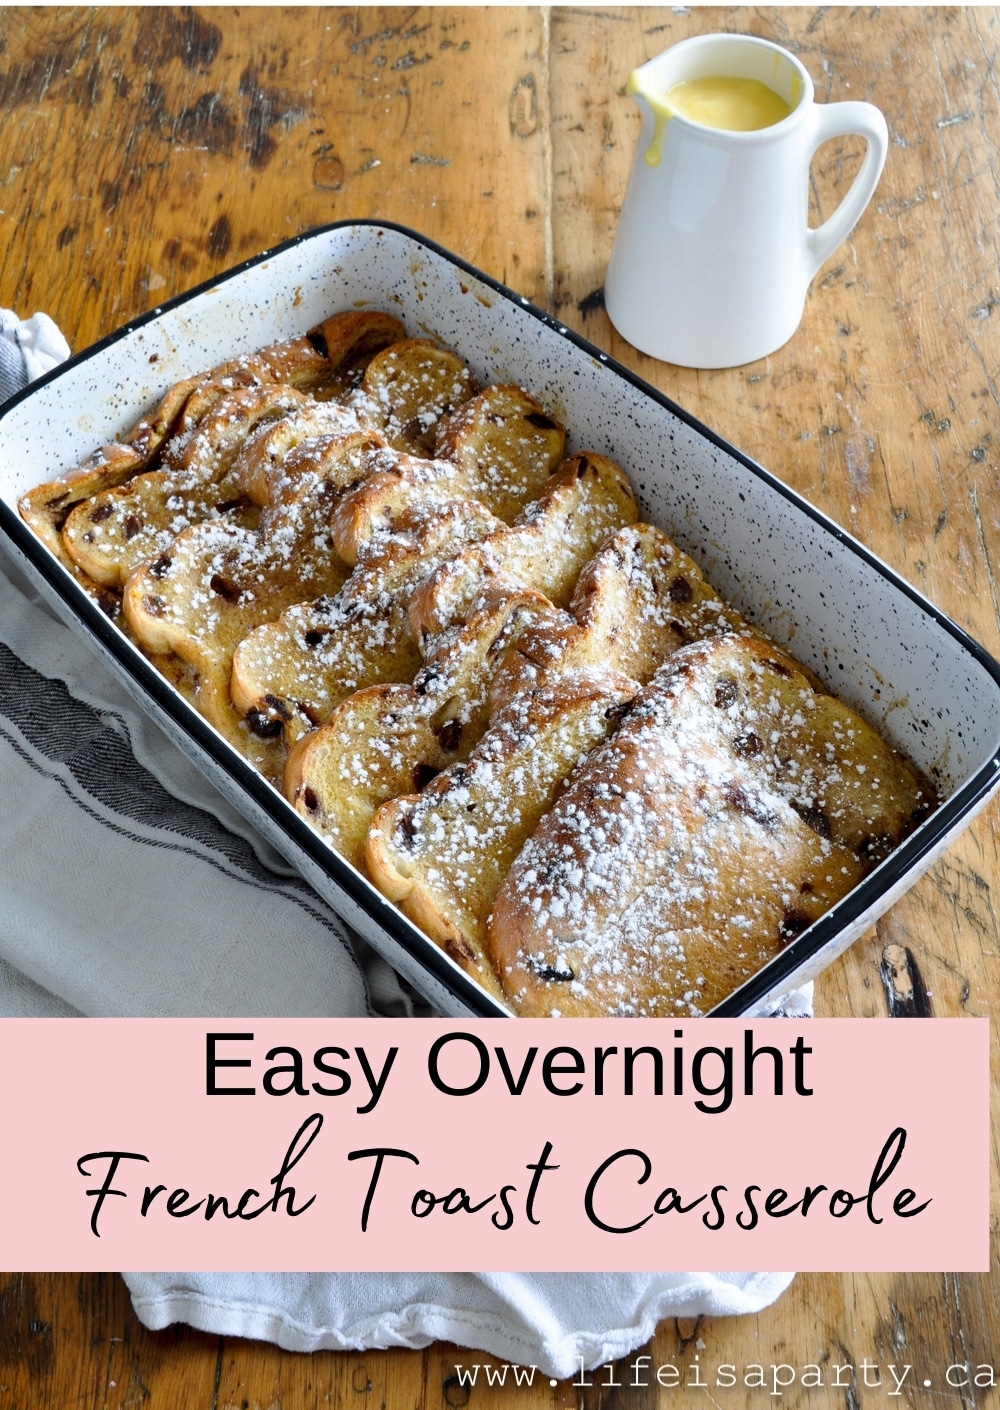 Easy Overnight French Toast Casserole: make the night before and bake in the morning. Serve with custard sauce for breakfast or brunch.